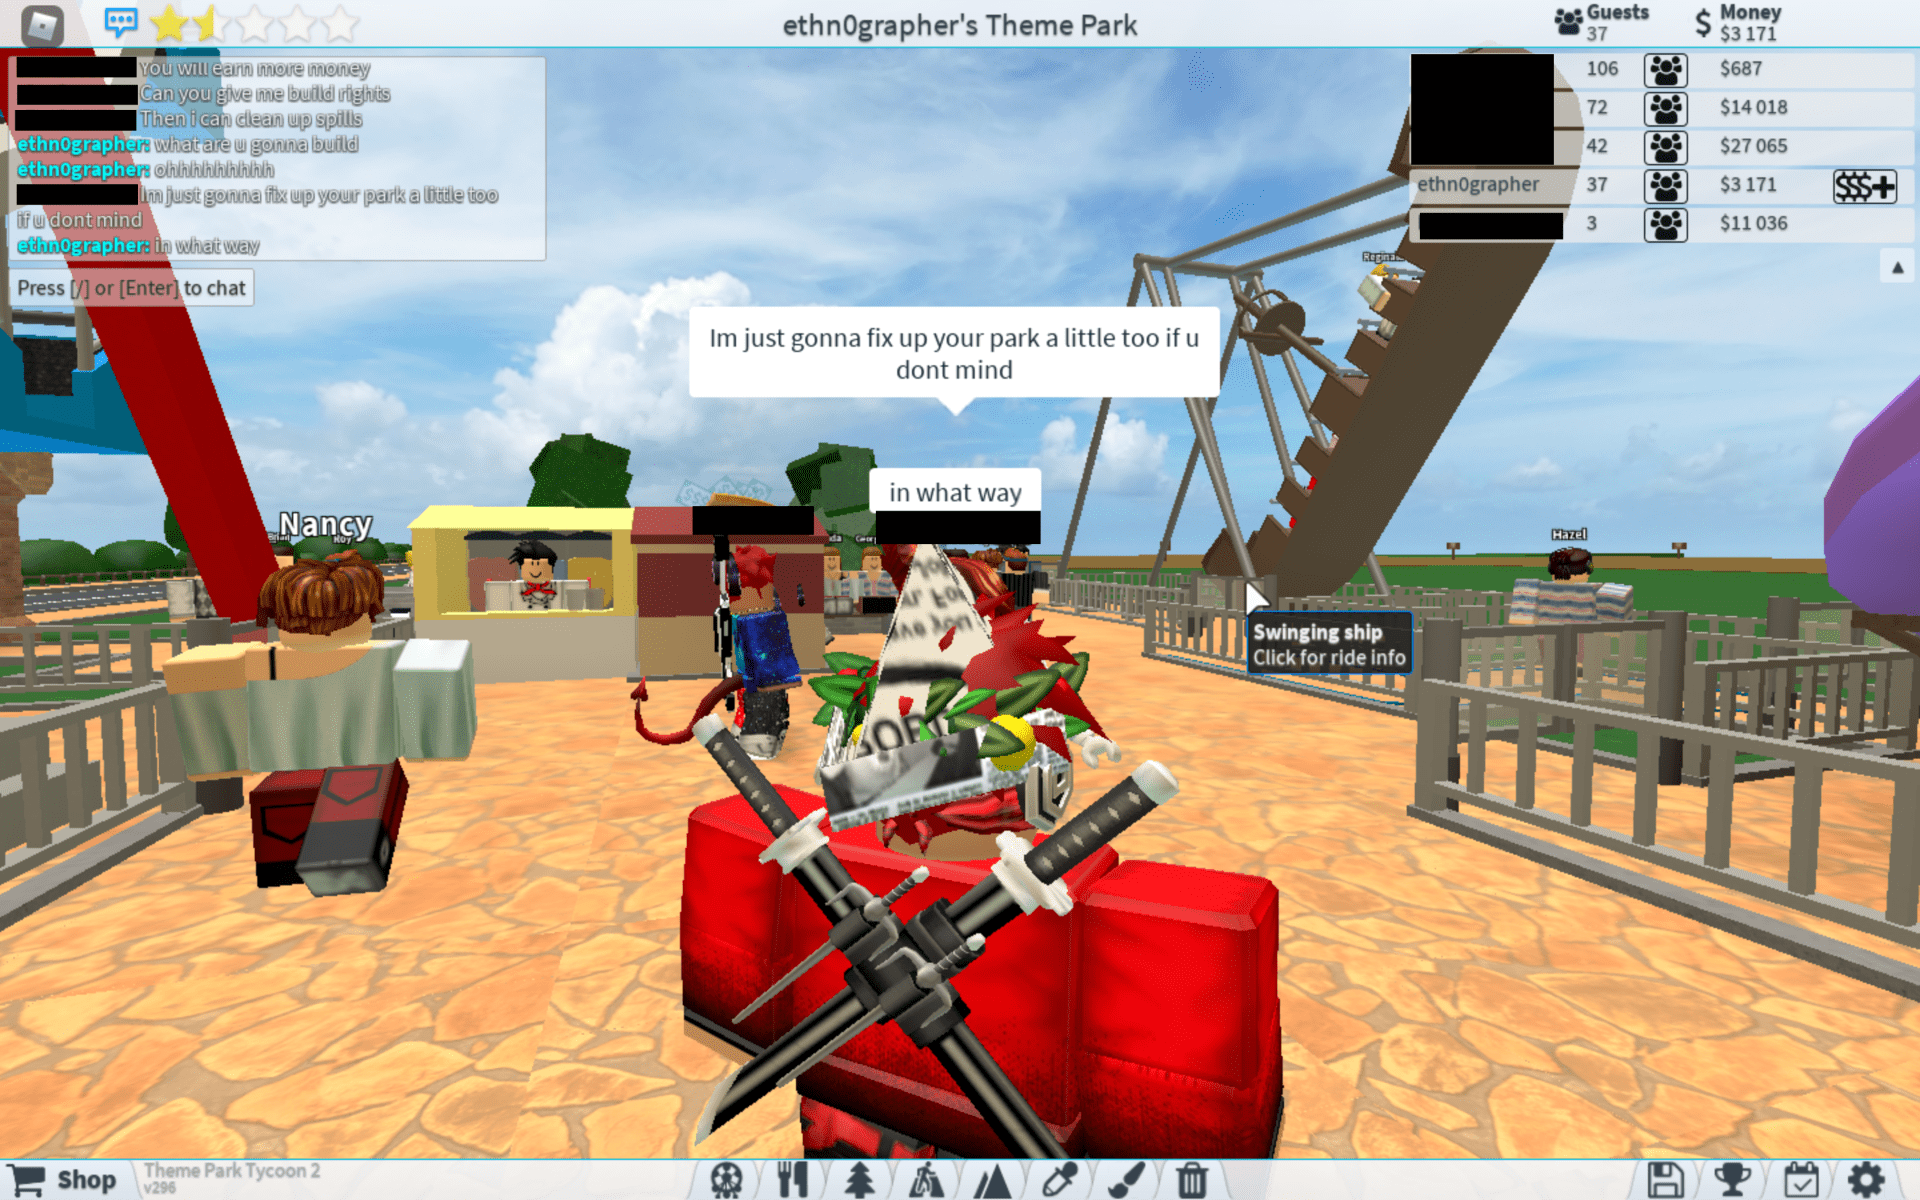 Friendship And Care In Roblox Virtual Ethnographic Methods Class Research Portfolio - roblox roleplay games of water parks